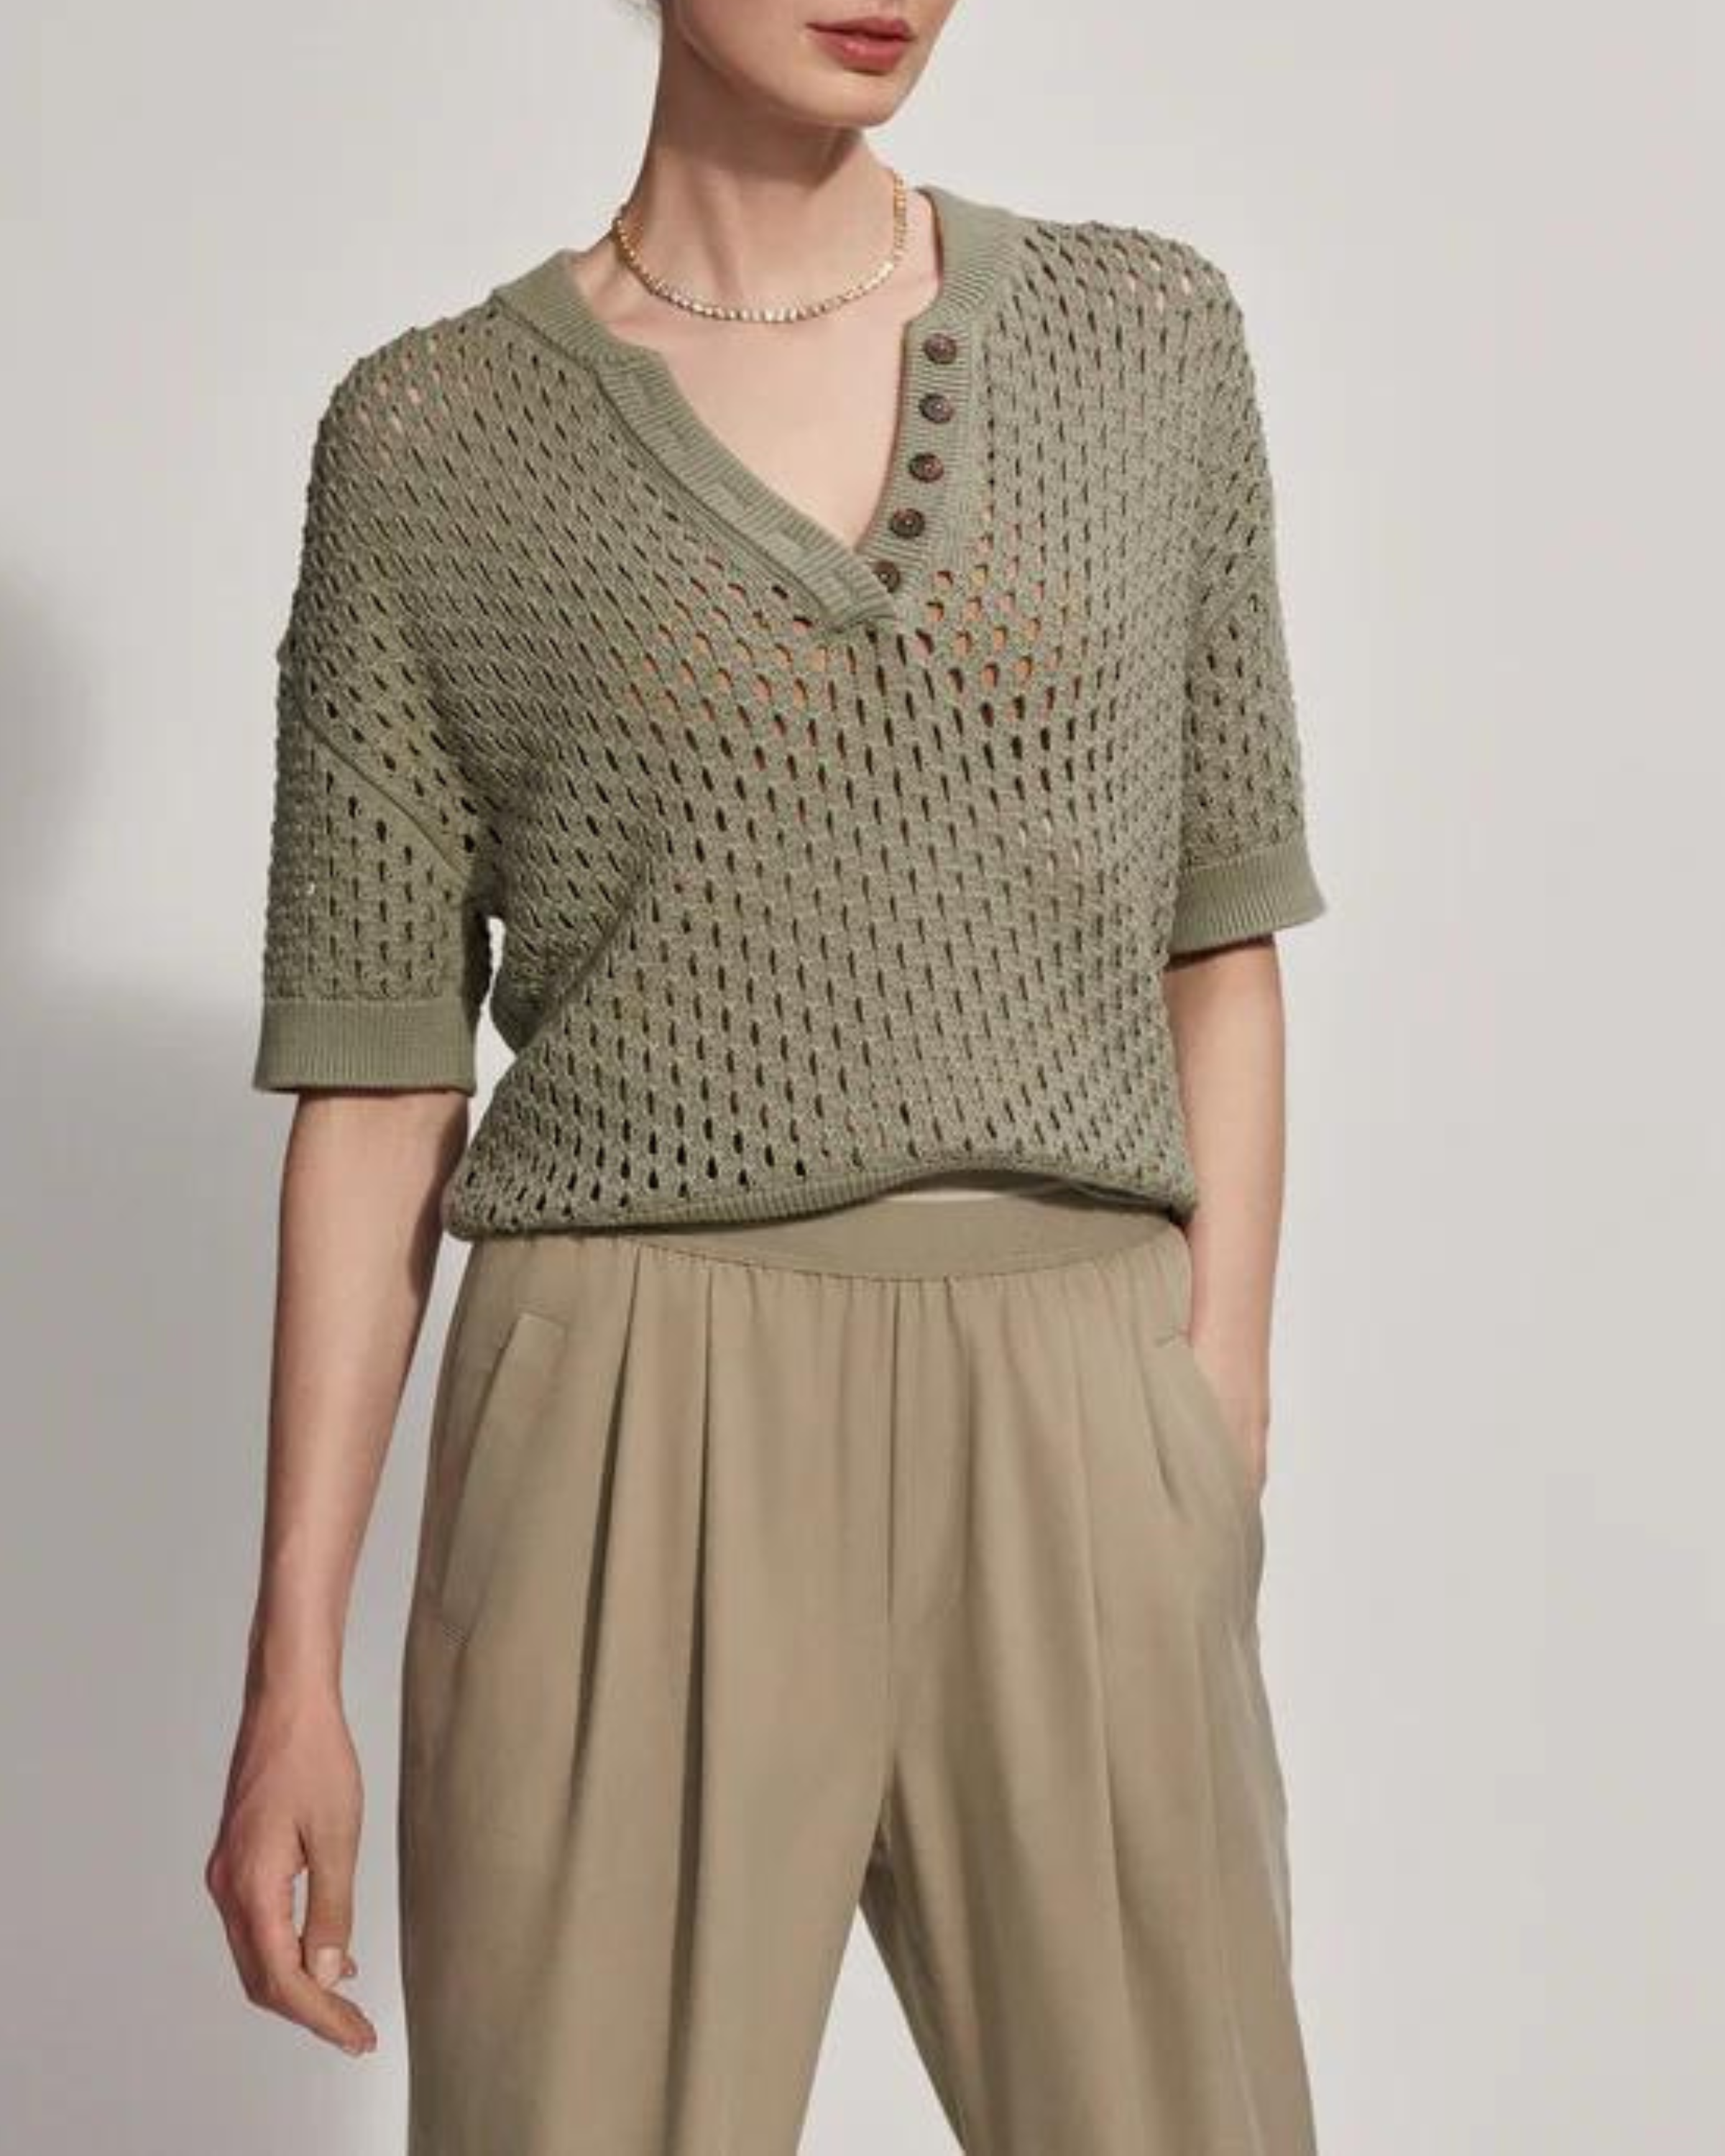 Varley Eaton Knit Top in Seagrass